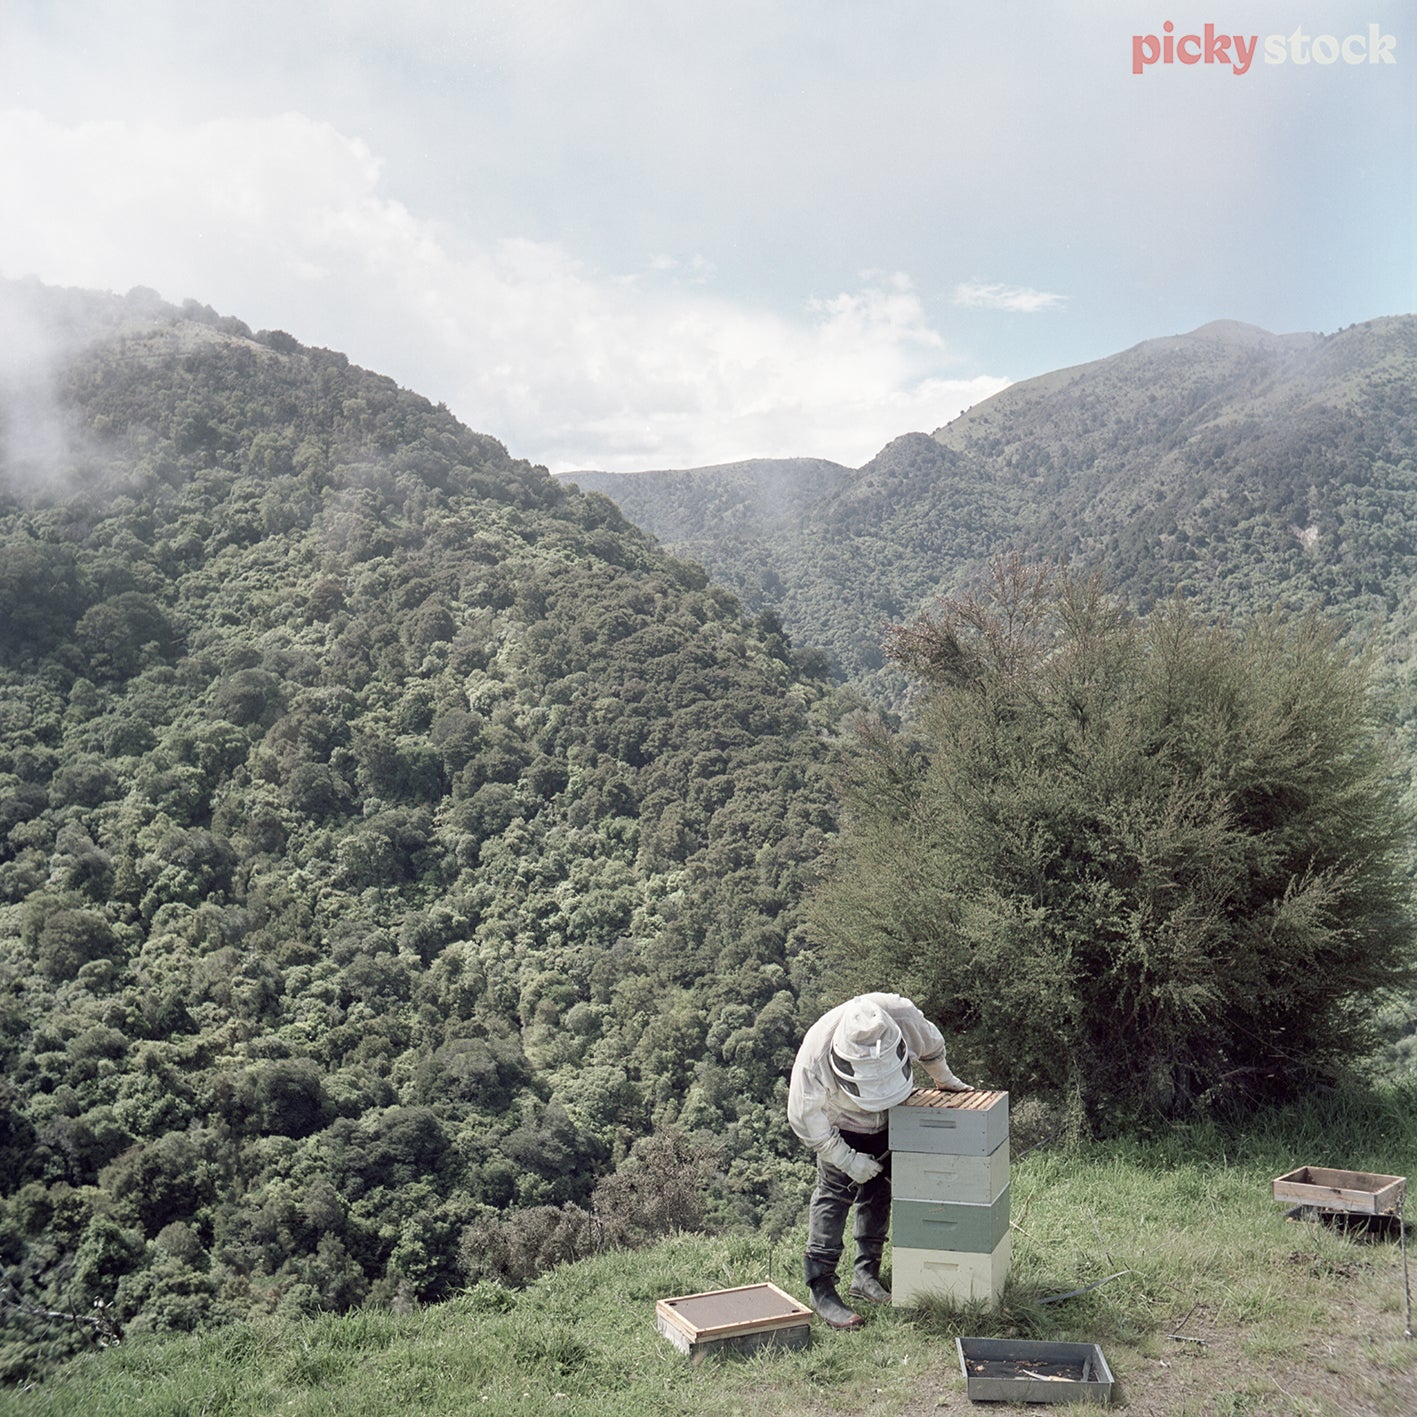 Single beekeeper in full protective gear checking hives against dramatic bush and hill face. 